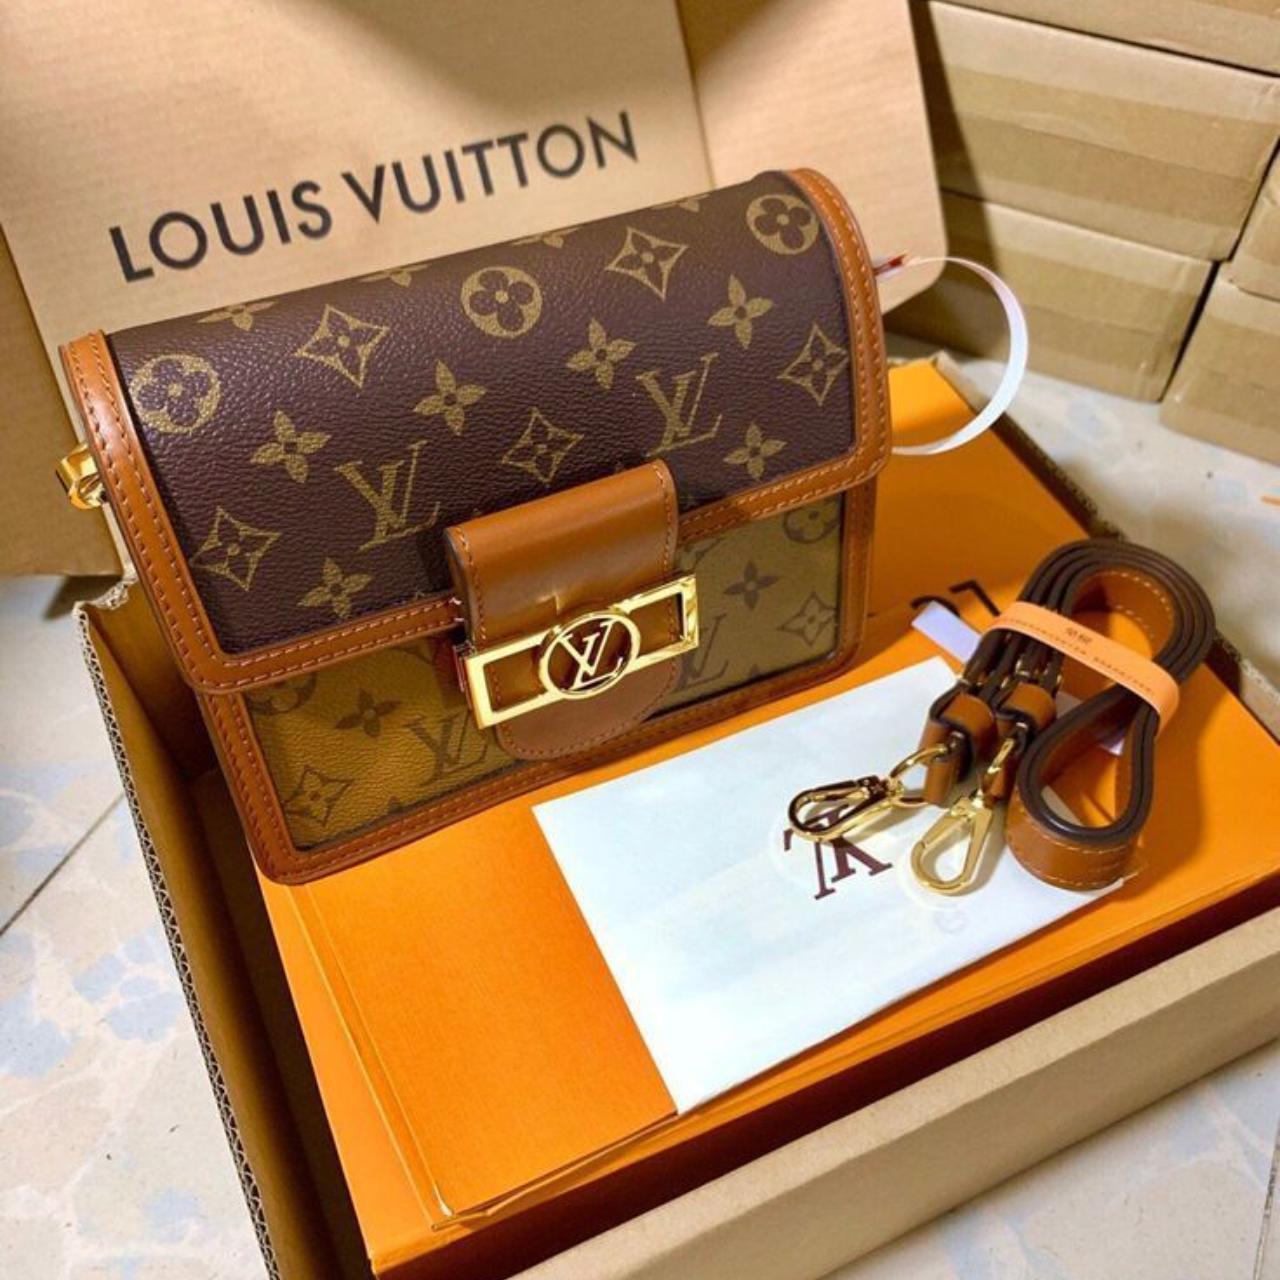 This is a pre-owned LV bag that has been restored. - Depop